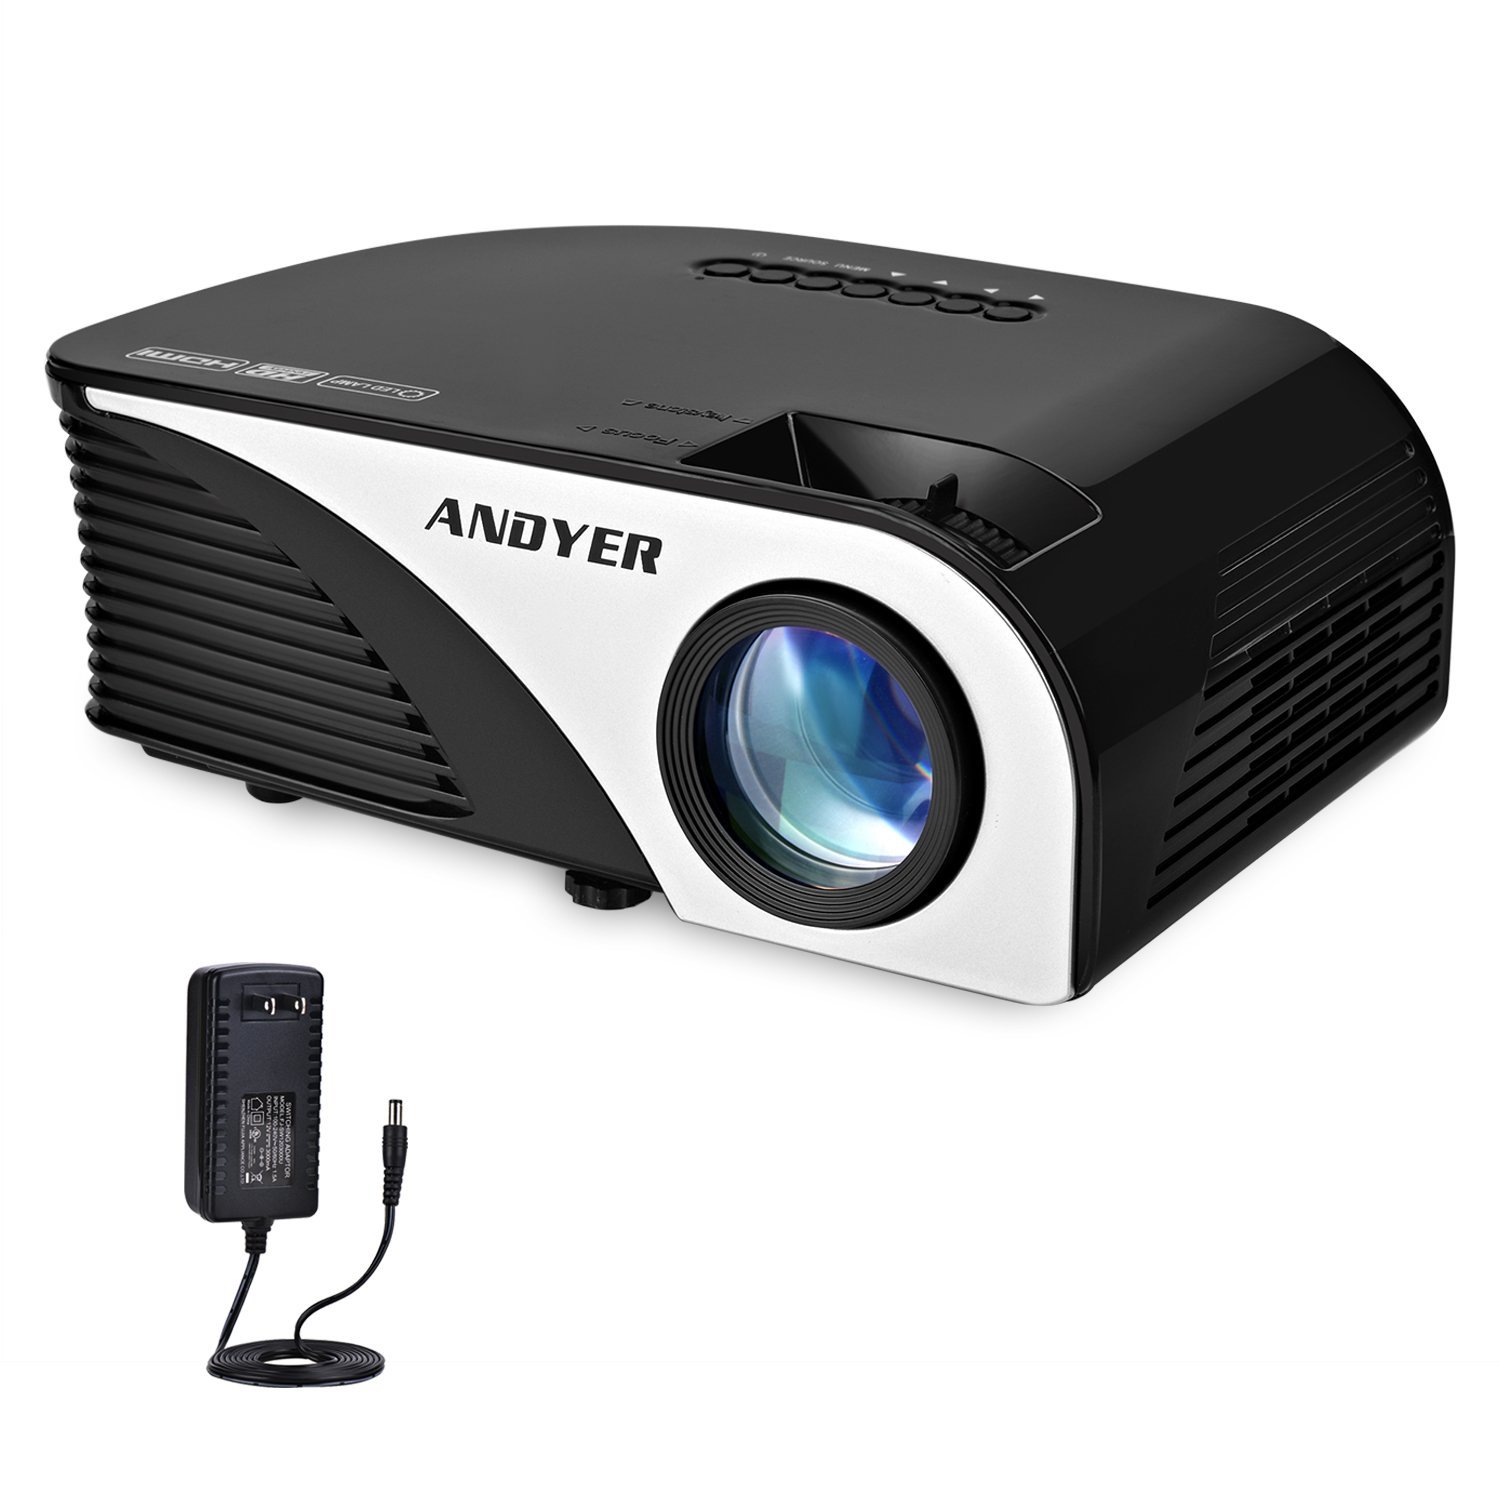 Projector, Andyer 805B-Plus Portable Projector LED Mini Projector 1080P 1500 Luminous Efficiency 150'' for Home Cinema Theater/Game/TV Show Support PC Laptop USB TV Box iPad iphone Smartphone-Black